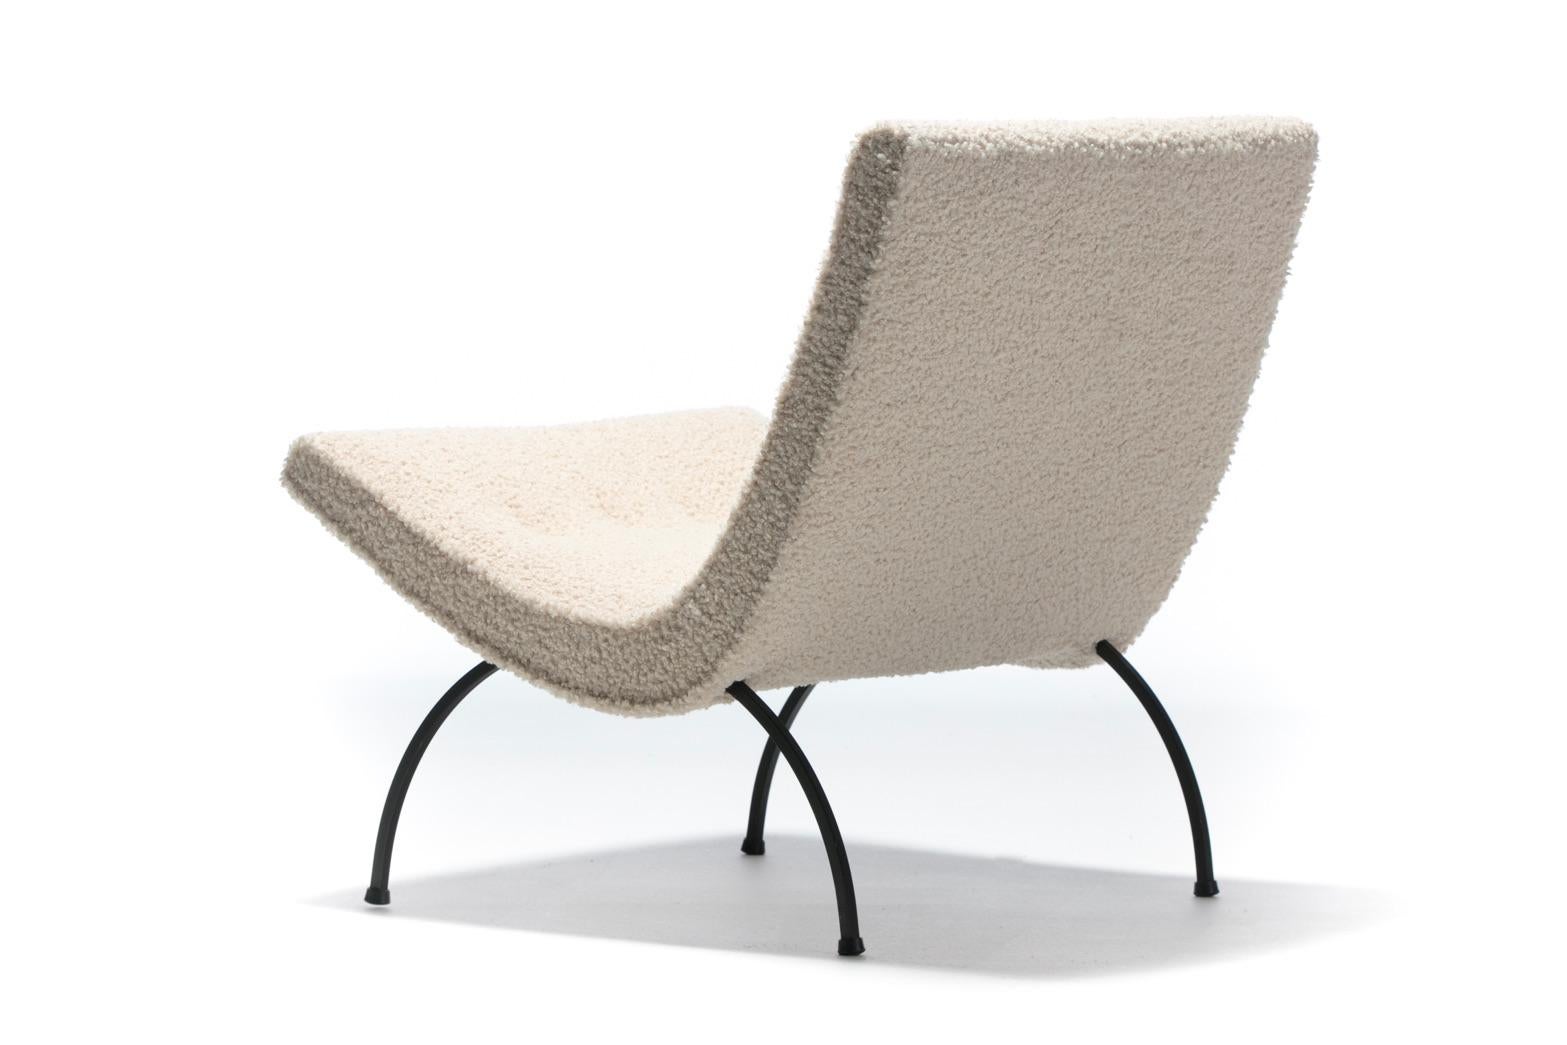 American Milo Baughman Scoop Chair in Super Soft Ivory Bouclé with Iron Legs c. 1950s  For Sale